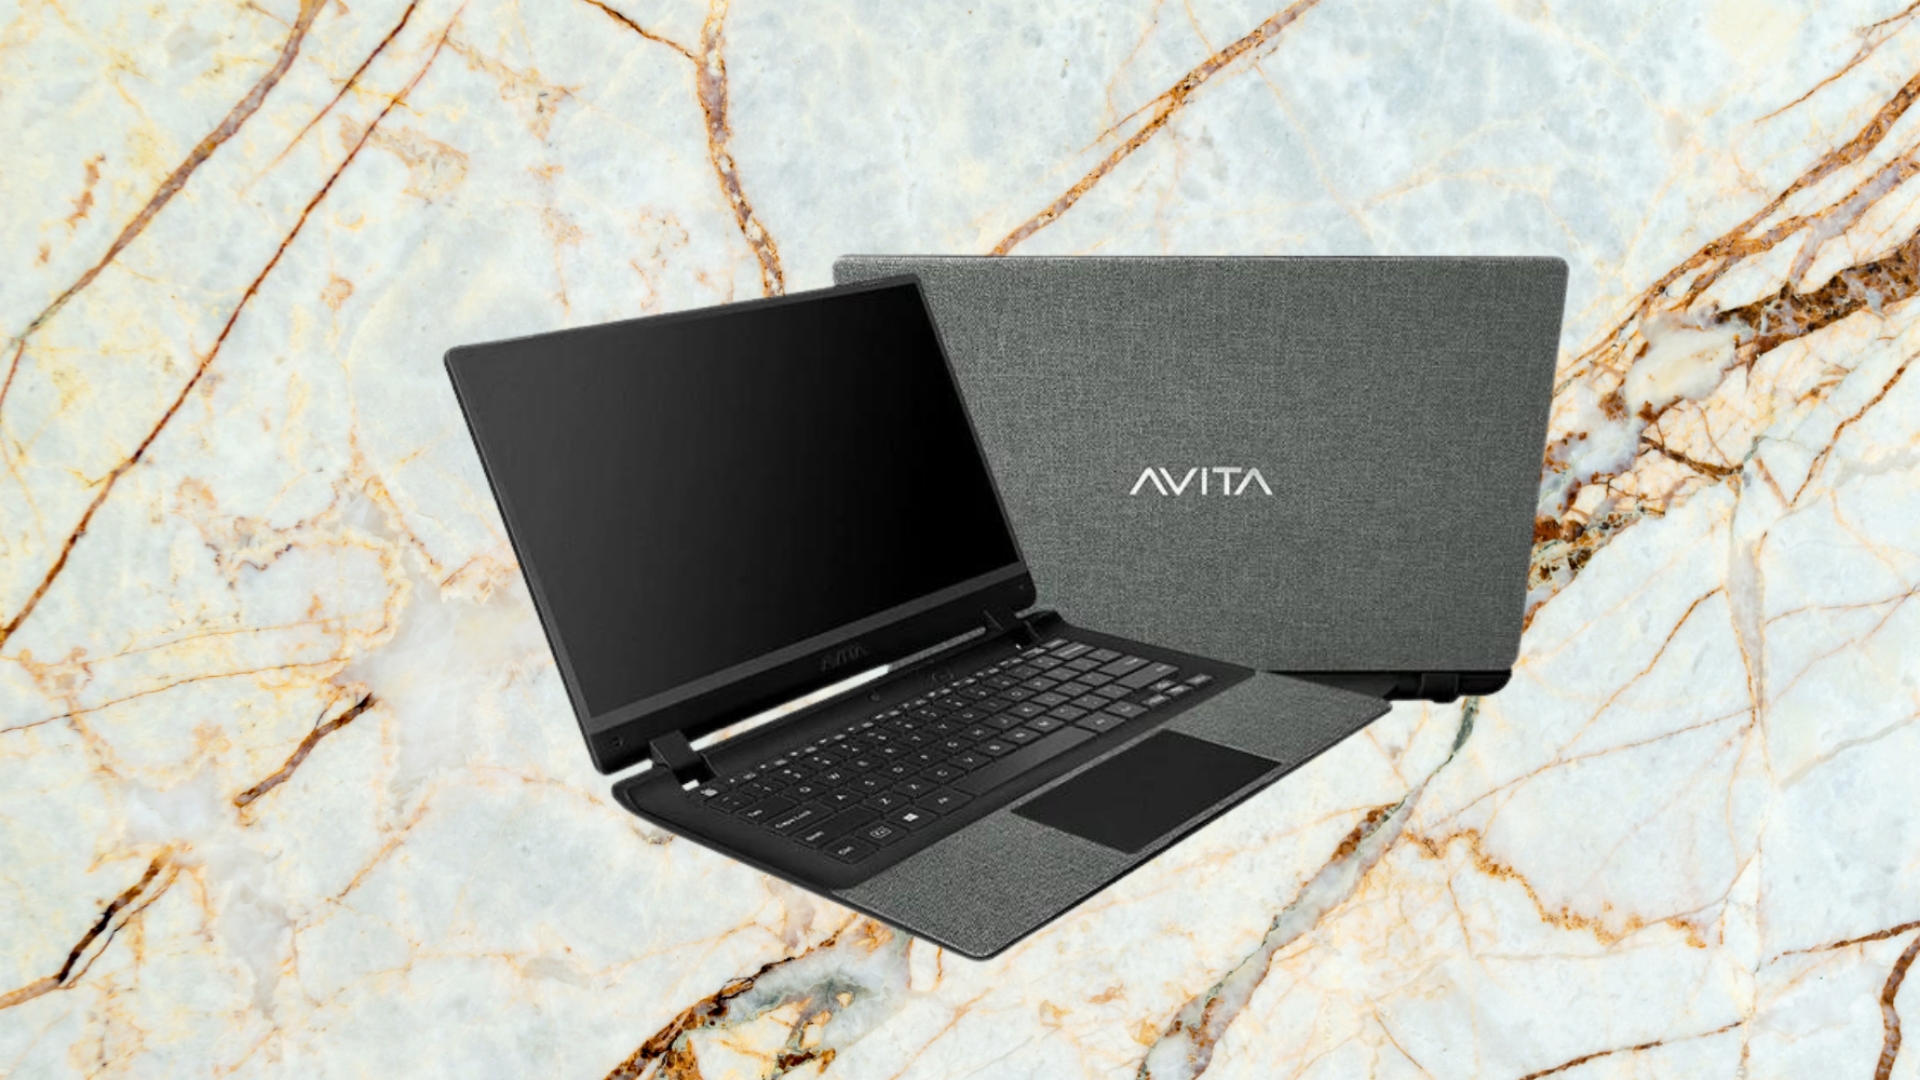 Grab the Avita Essential Laptop with Buy 1 Take 1 Promo for Only PHP 16,000!